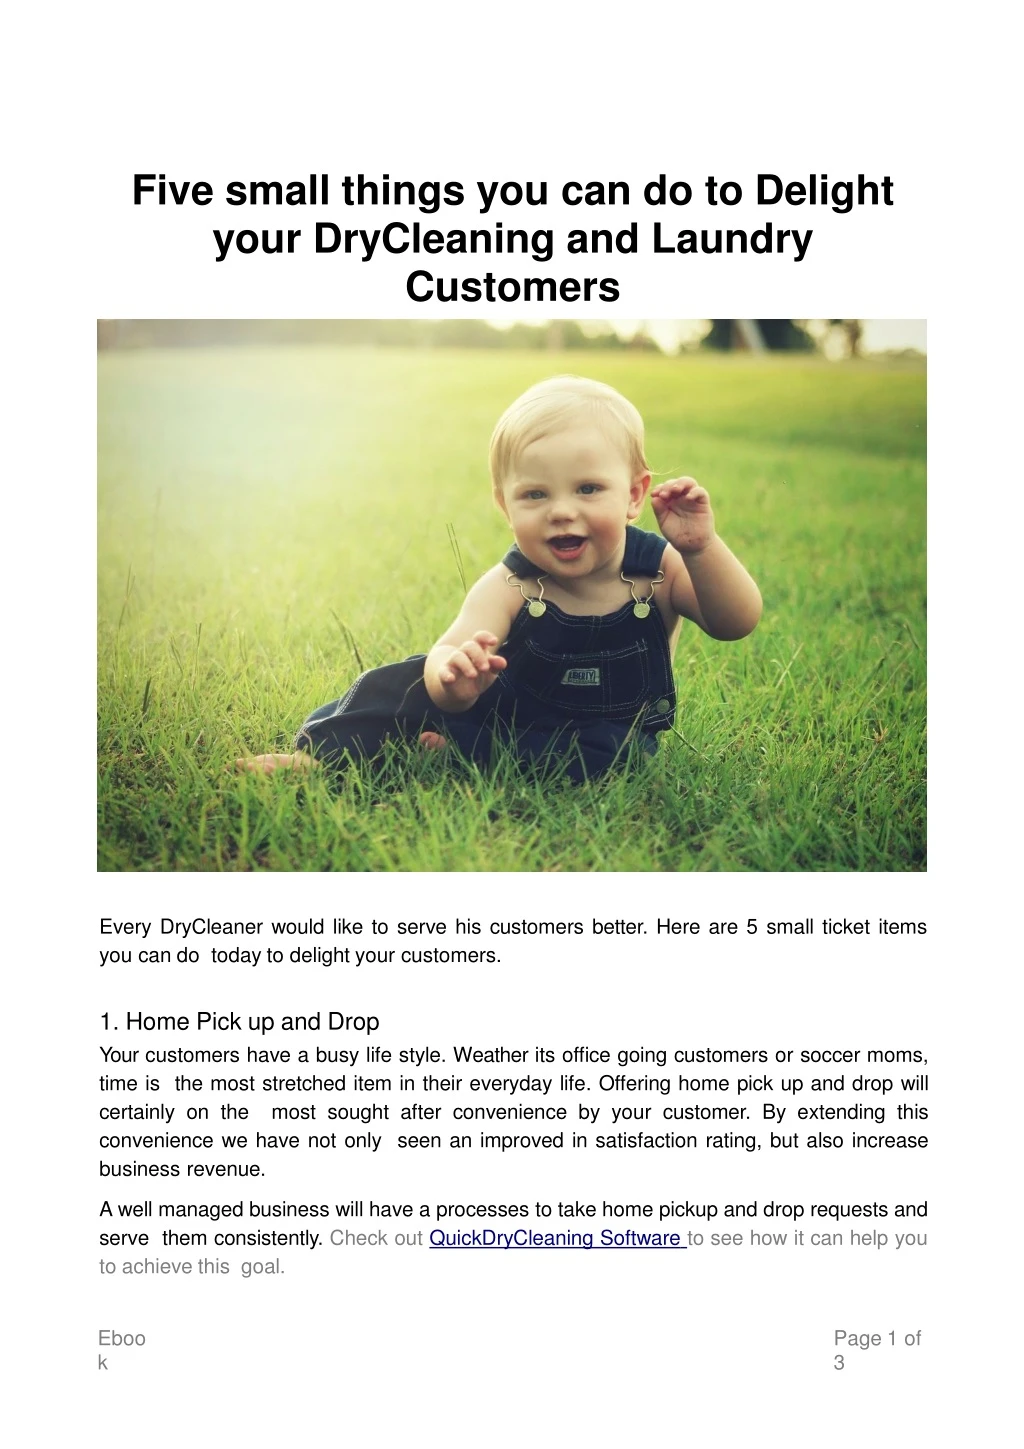 five small things you can do to delight your drycleaning and laundry customers